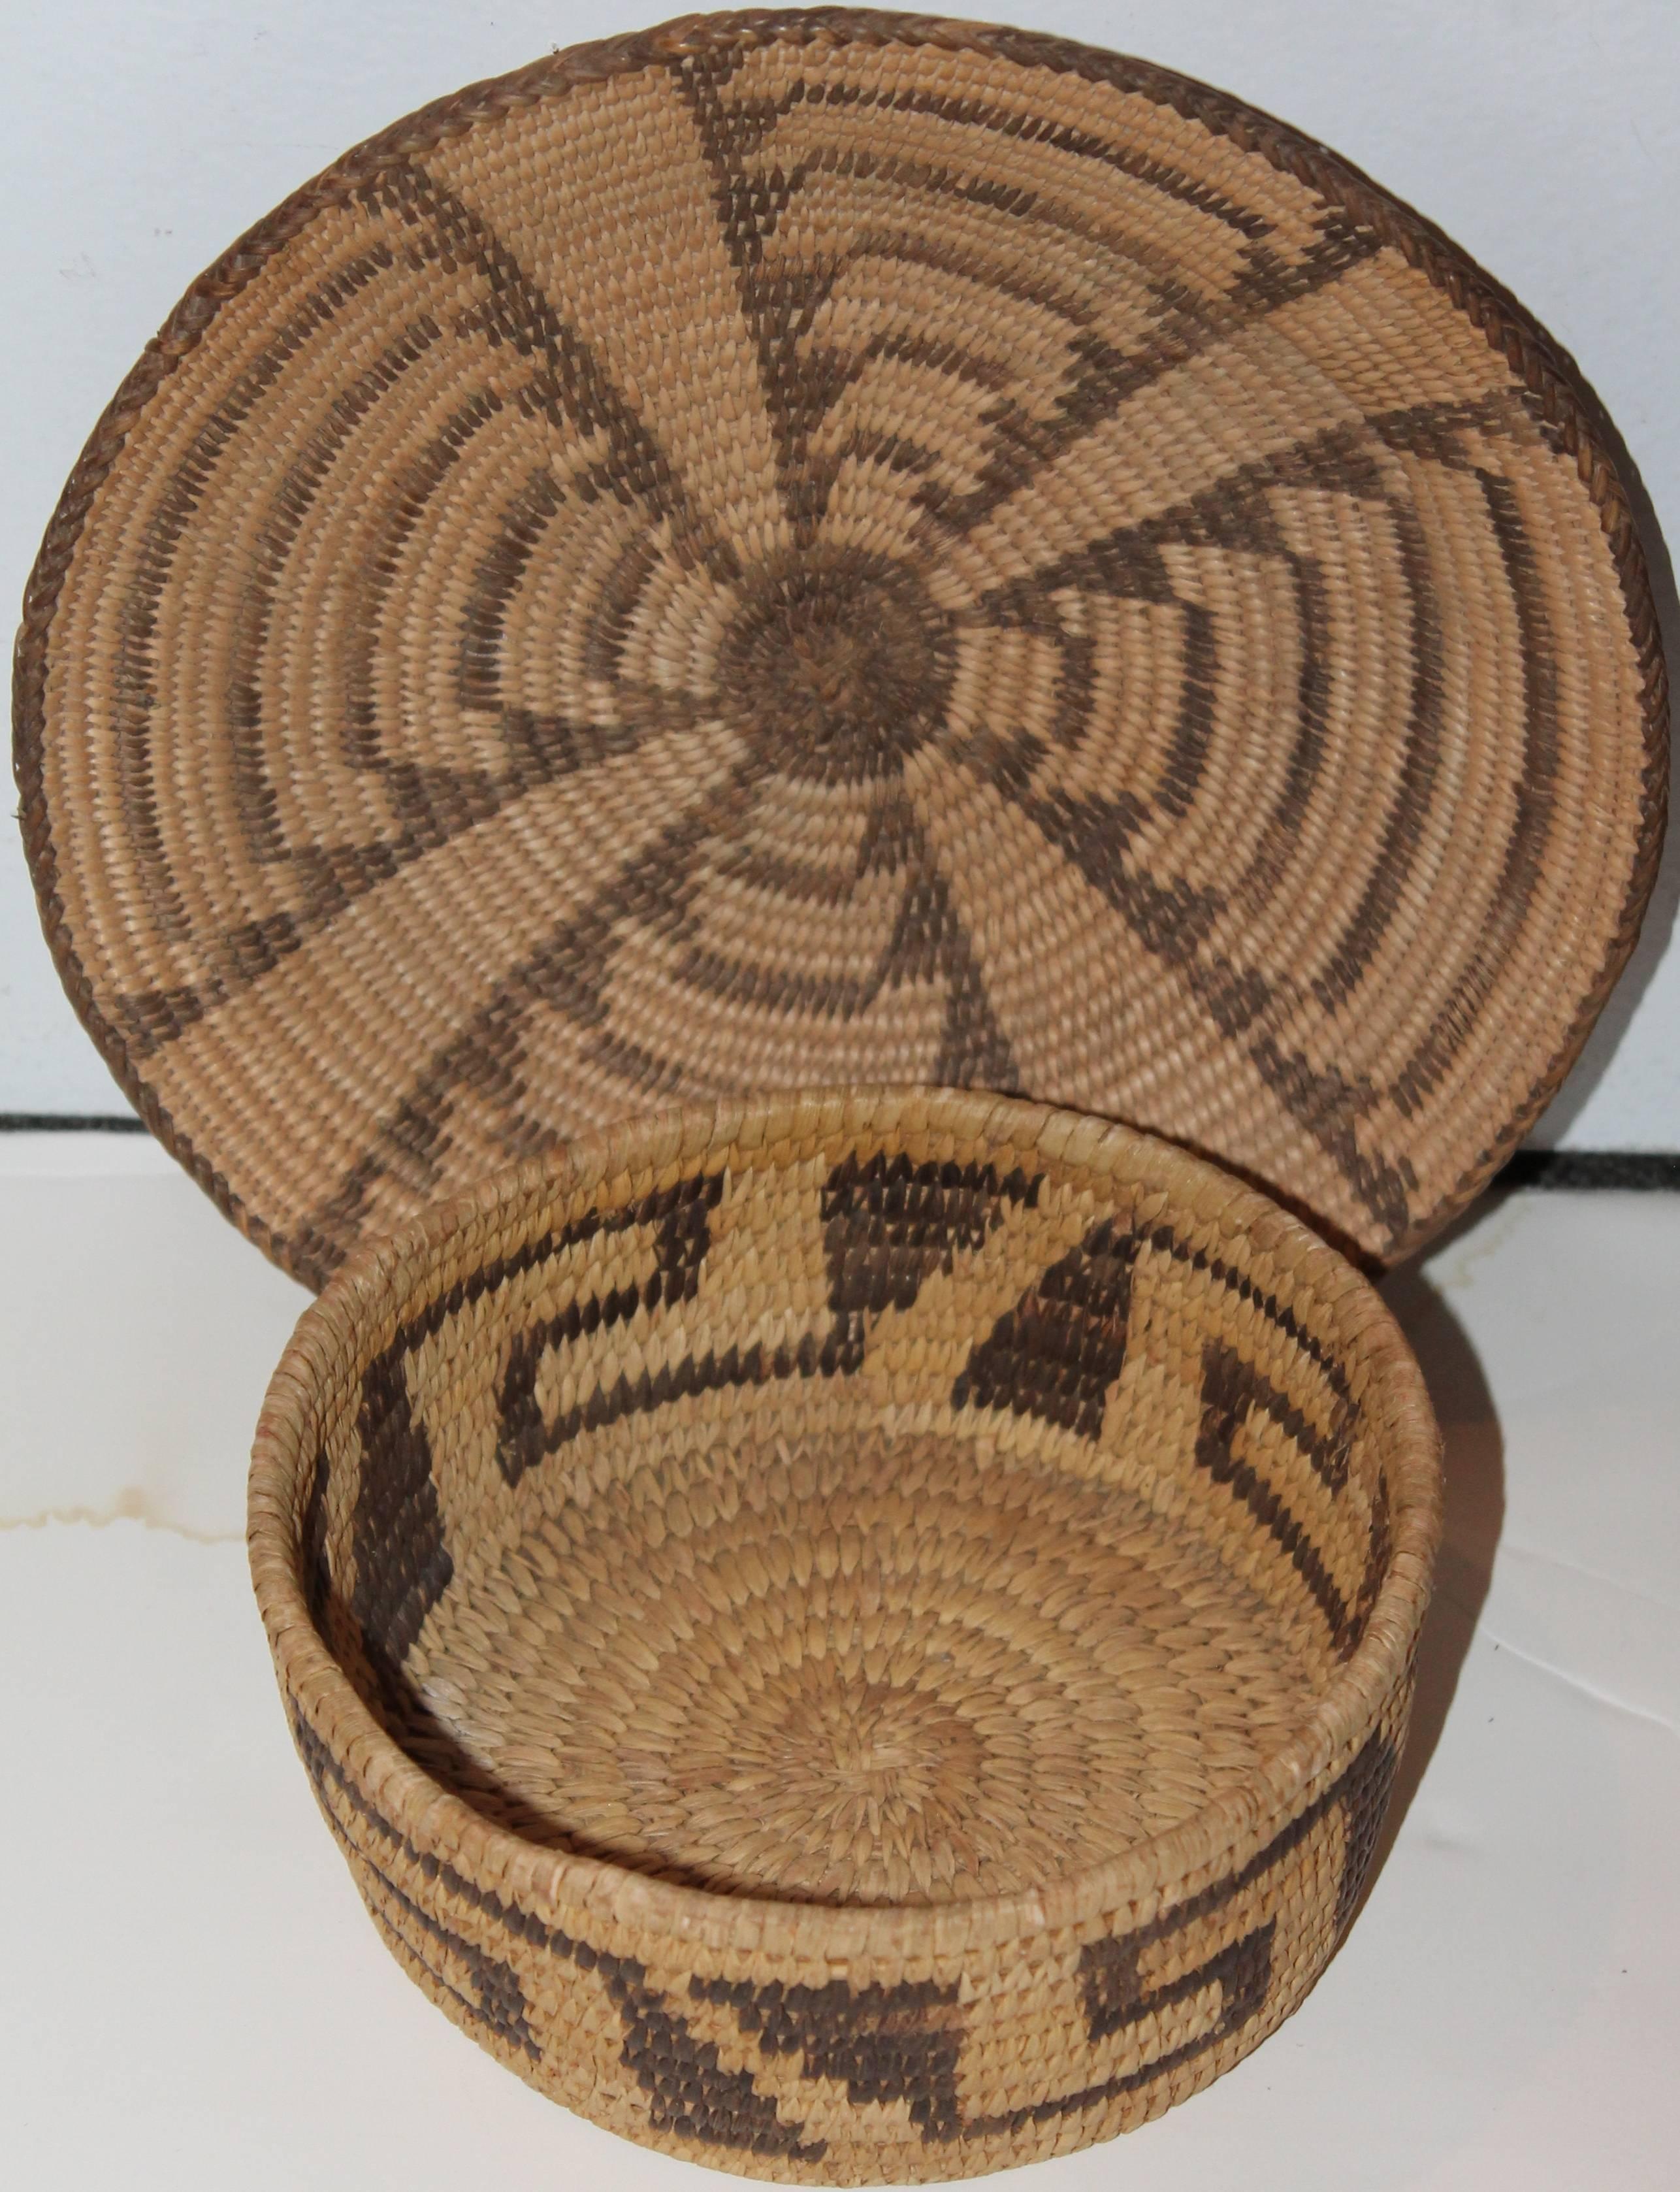 This is a Fine collection of four mint condition Papago Indian baskets. The larges tray is 10.5